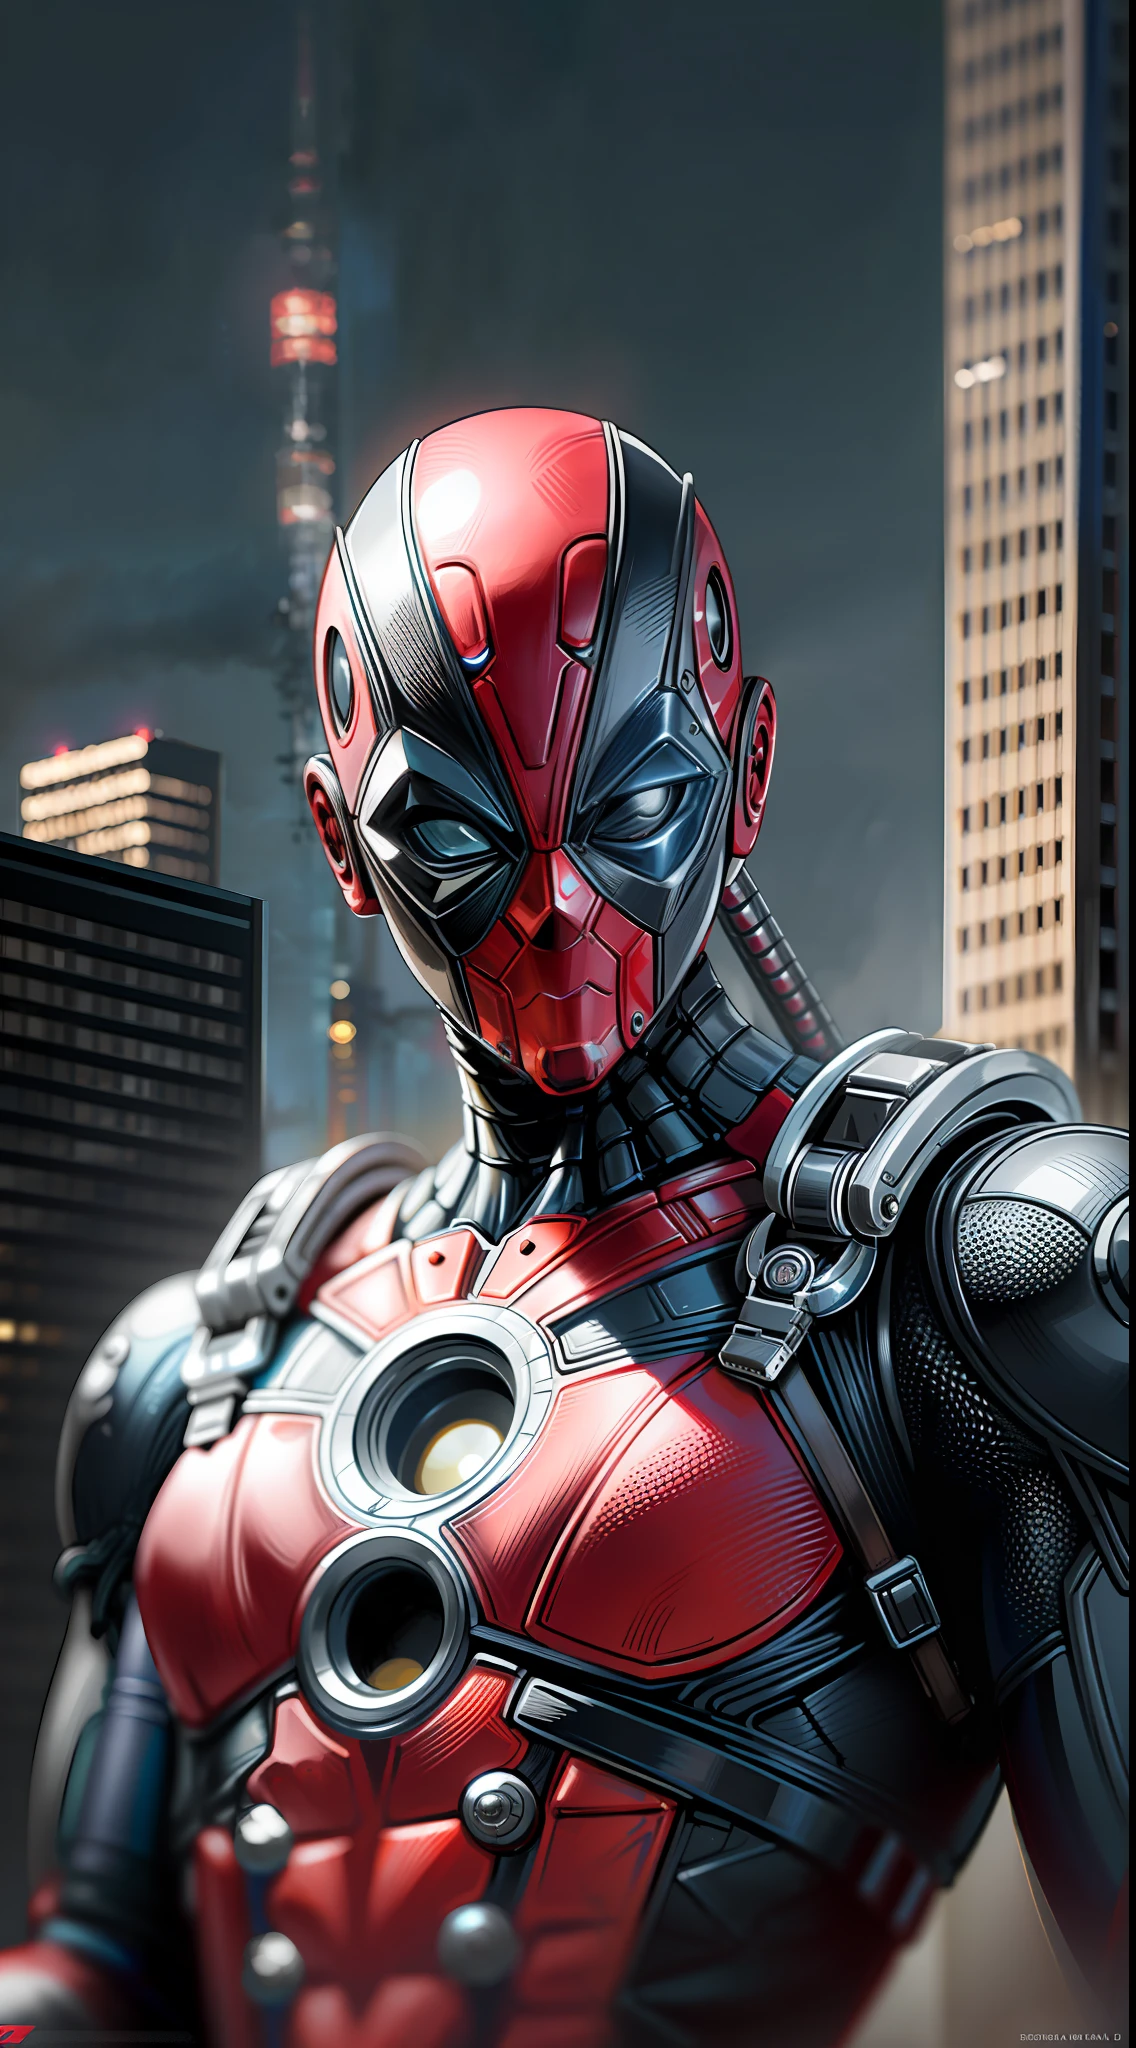 Deadpool from Marvel photography, biomechanical, hyper-realistic, insane small details, extremely clean lines, cyberpunk aesthetic, a masterpiece brought to Zbrush Central